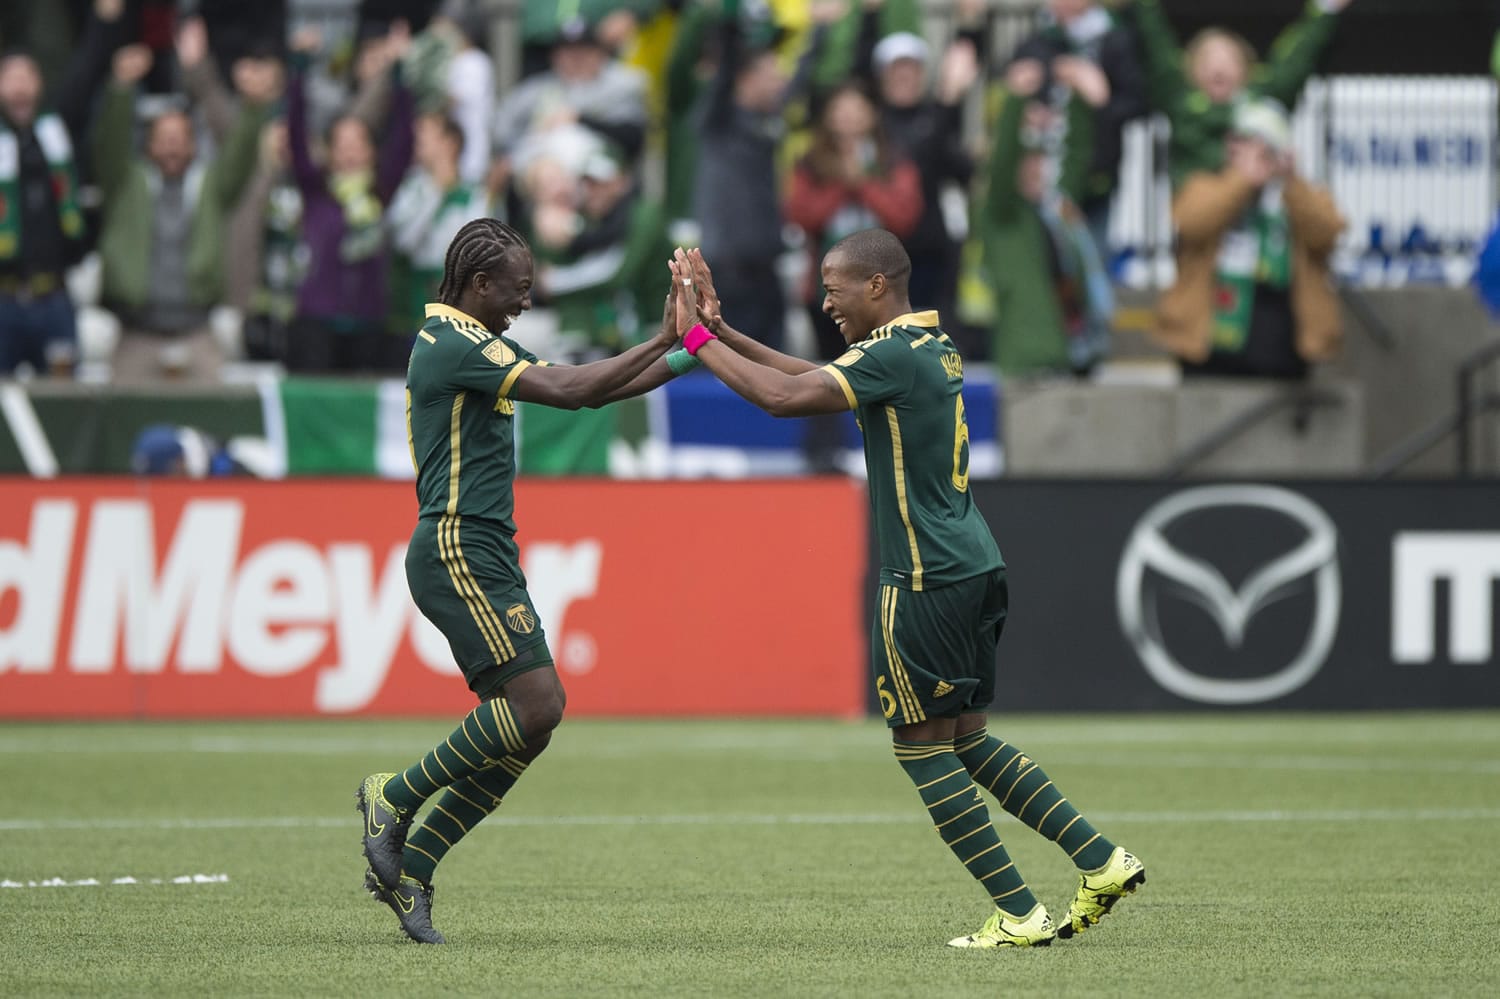 Portland Timbers midfielder Diego Chara, left, celebrates with teammate Darlington Nagbe, right, after Nagbe scored a goal in a game against the Colorado Rapids during the first half of their MLS soccer game in Portland, Ore., Sunday, Oct. 25, 2015.